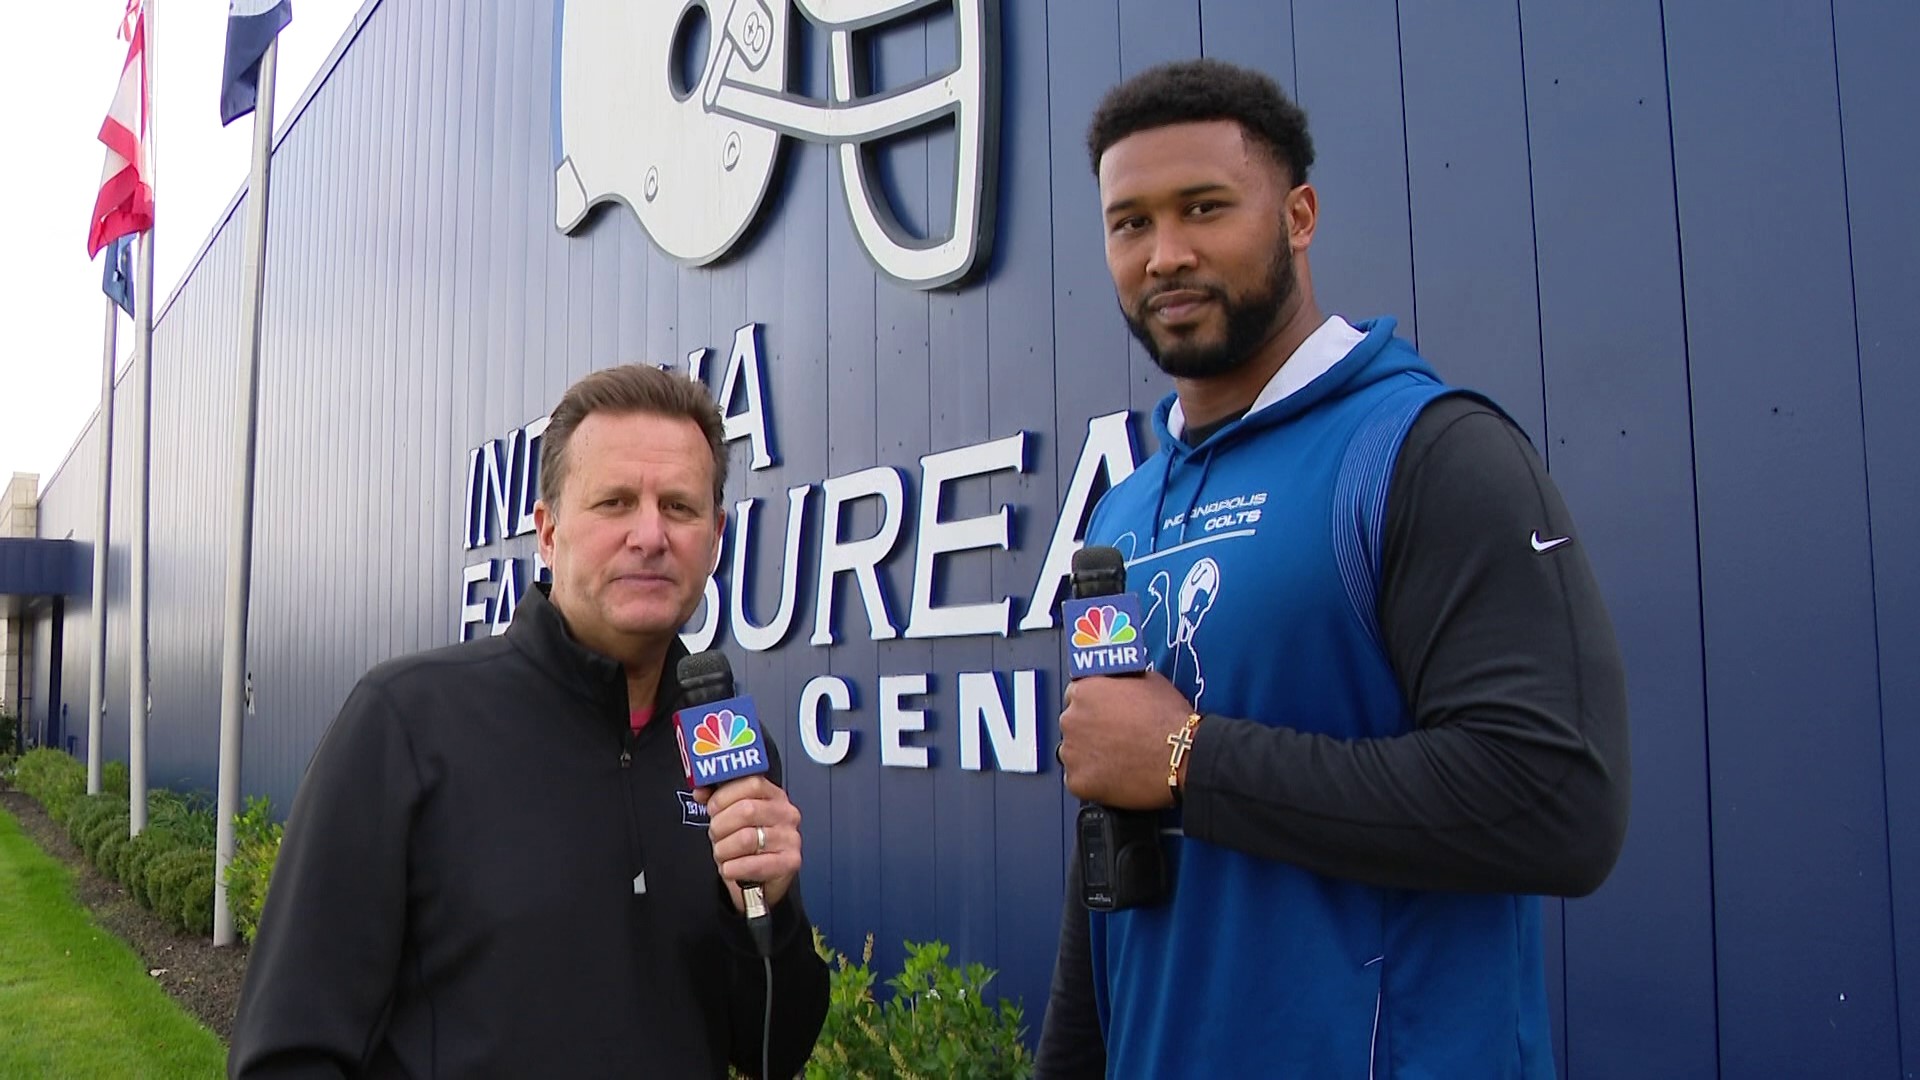 13Sports director Dave Calabro and Indianapolis Colts defensive end DeForest Buckner chat about what AR's injury means and the Colts' preparations for the Browns.